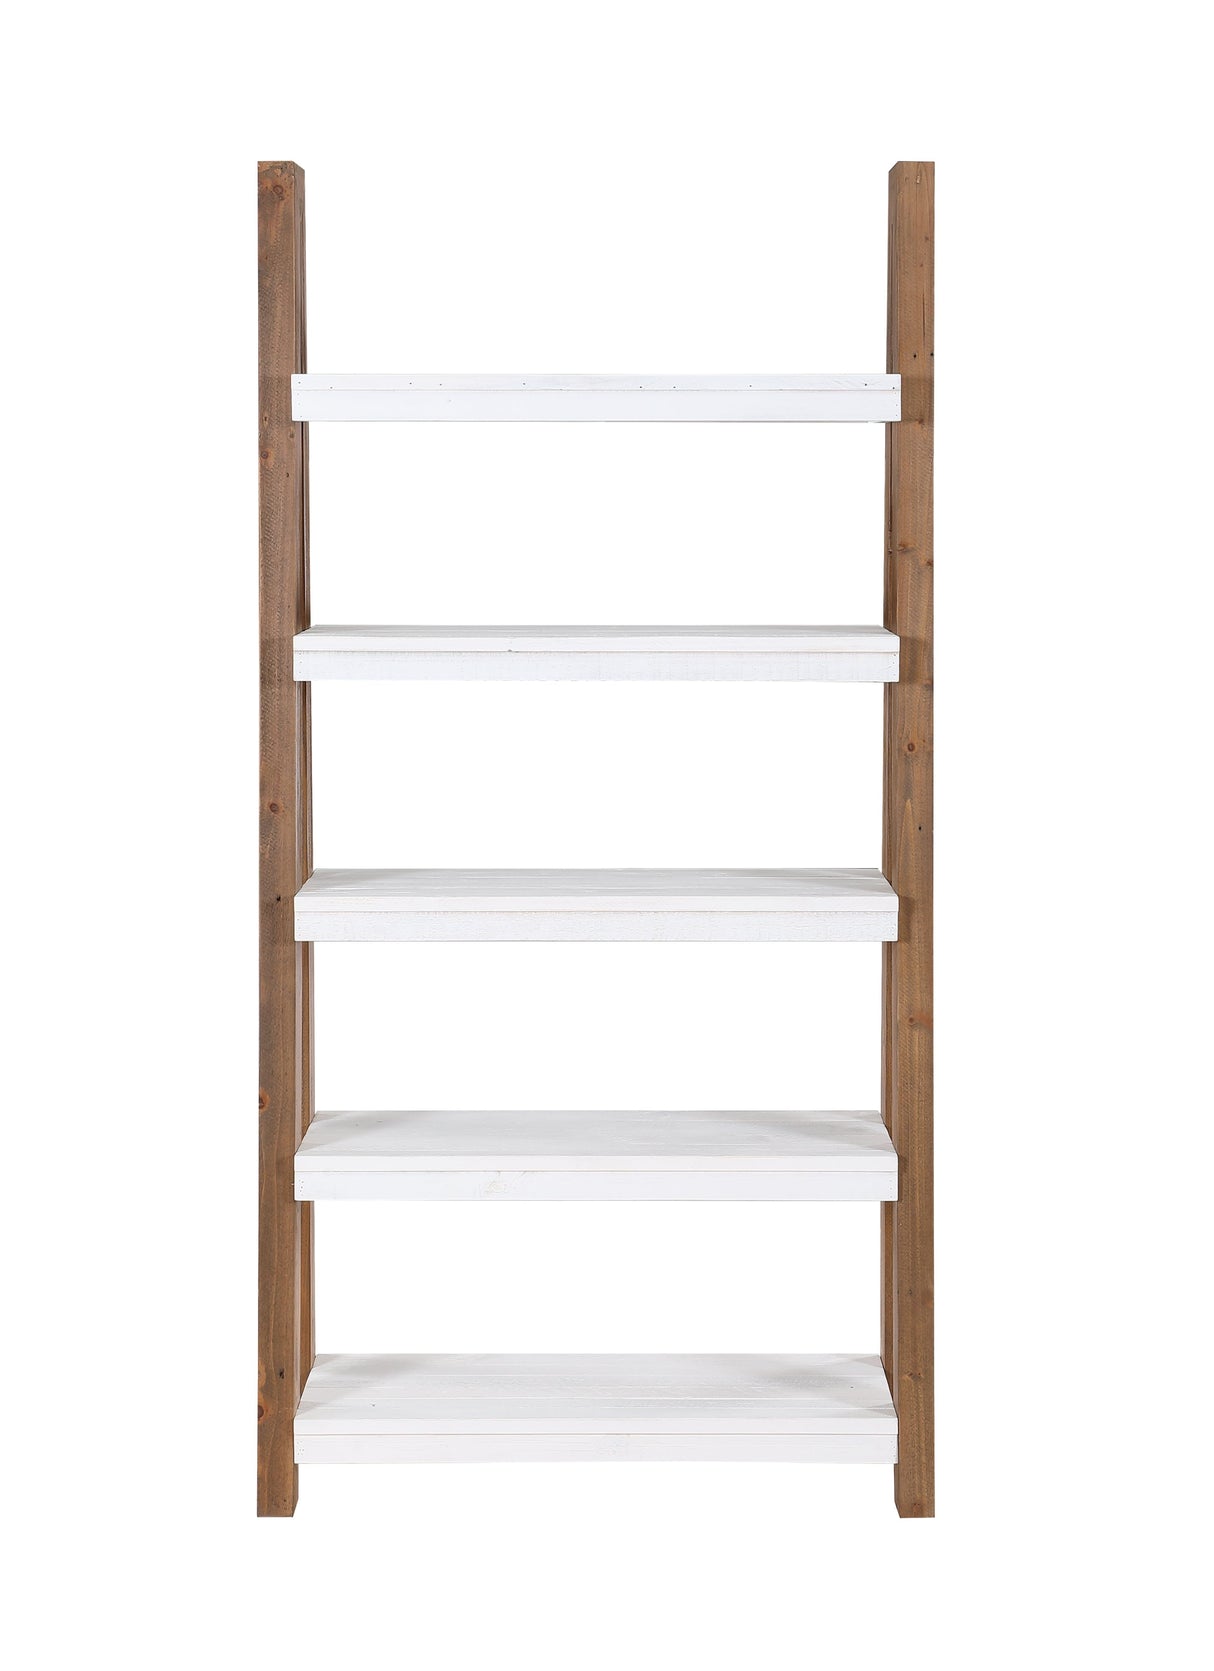 Baumhaus Trinity - Reclaimed Large Bookcase Open (VWP01C)